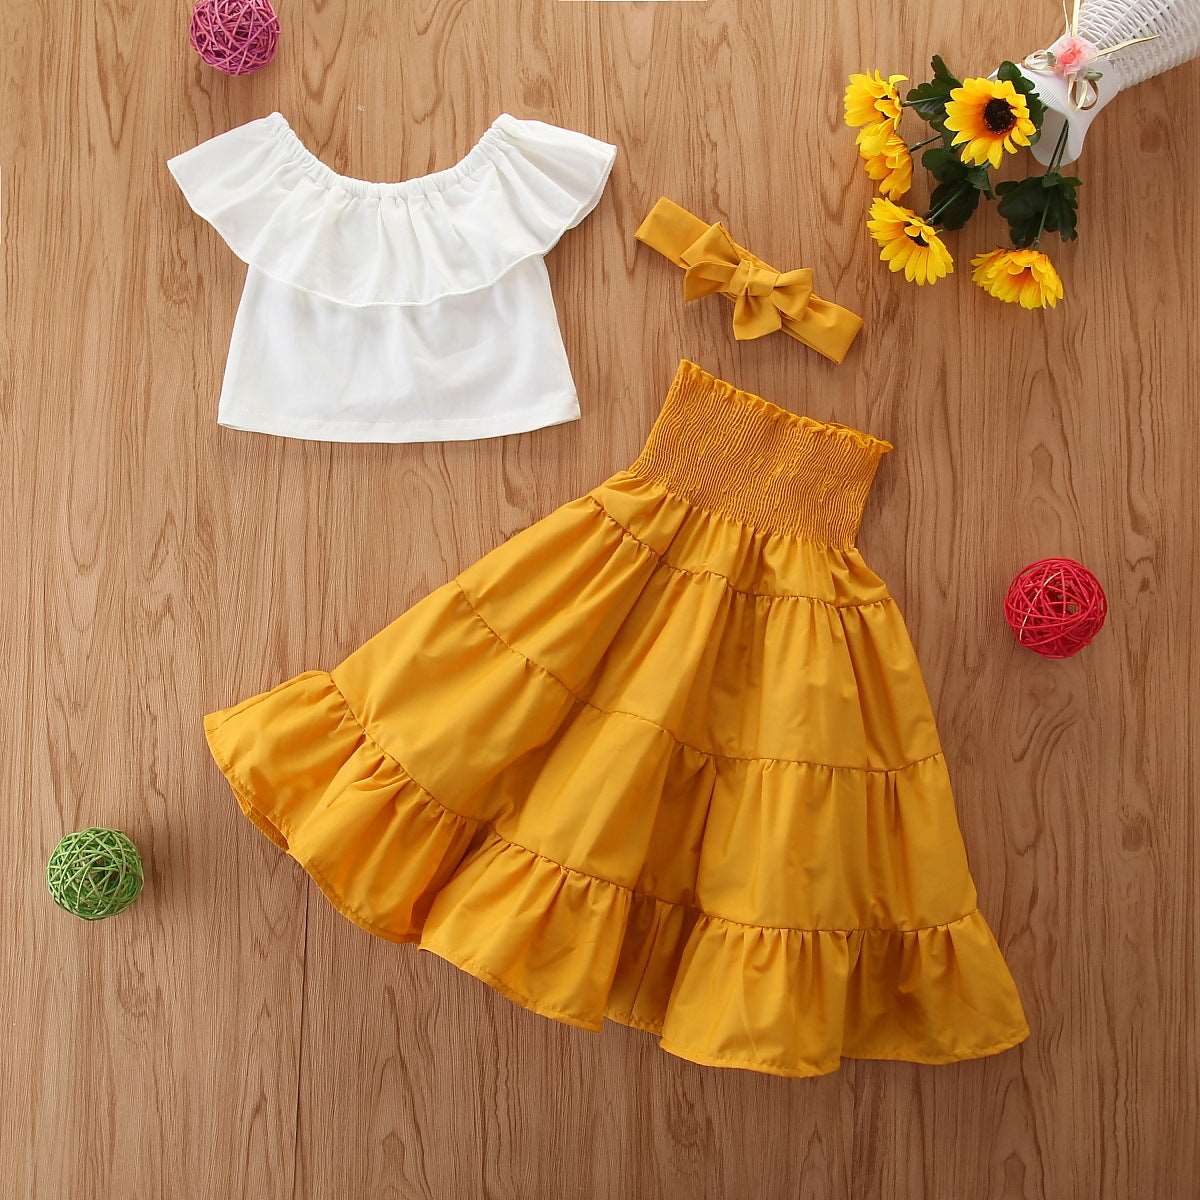 Baby Girl Ruffled Top, High Waist Skirt and Head Band Outfit Set